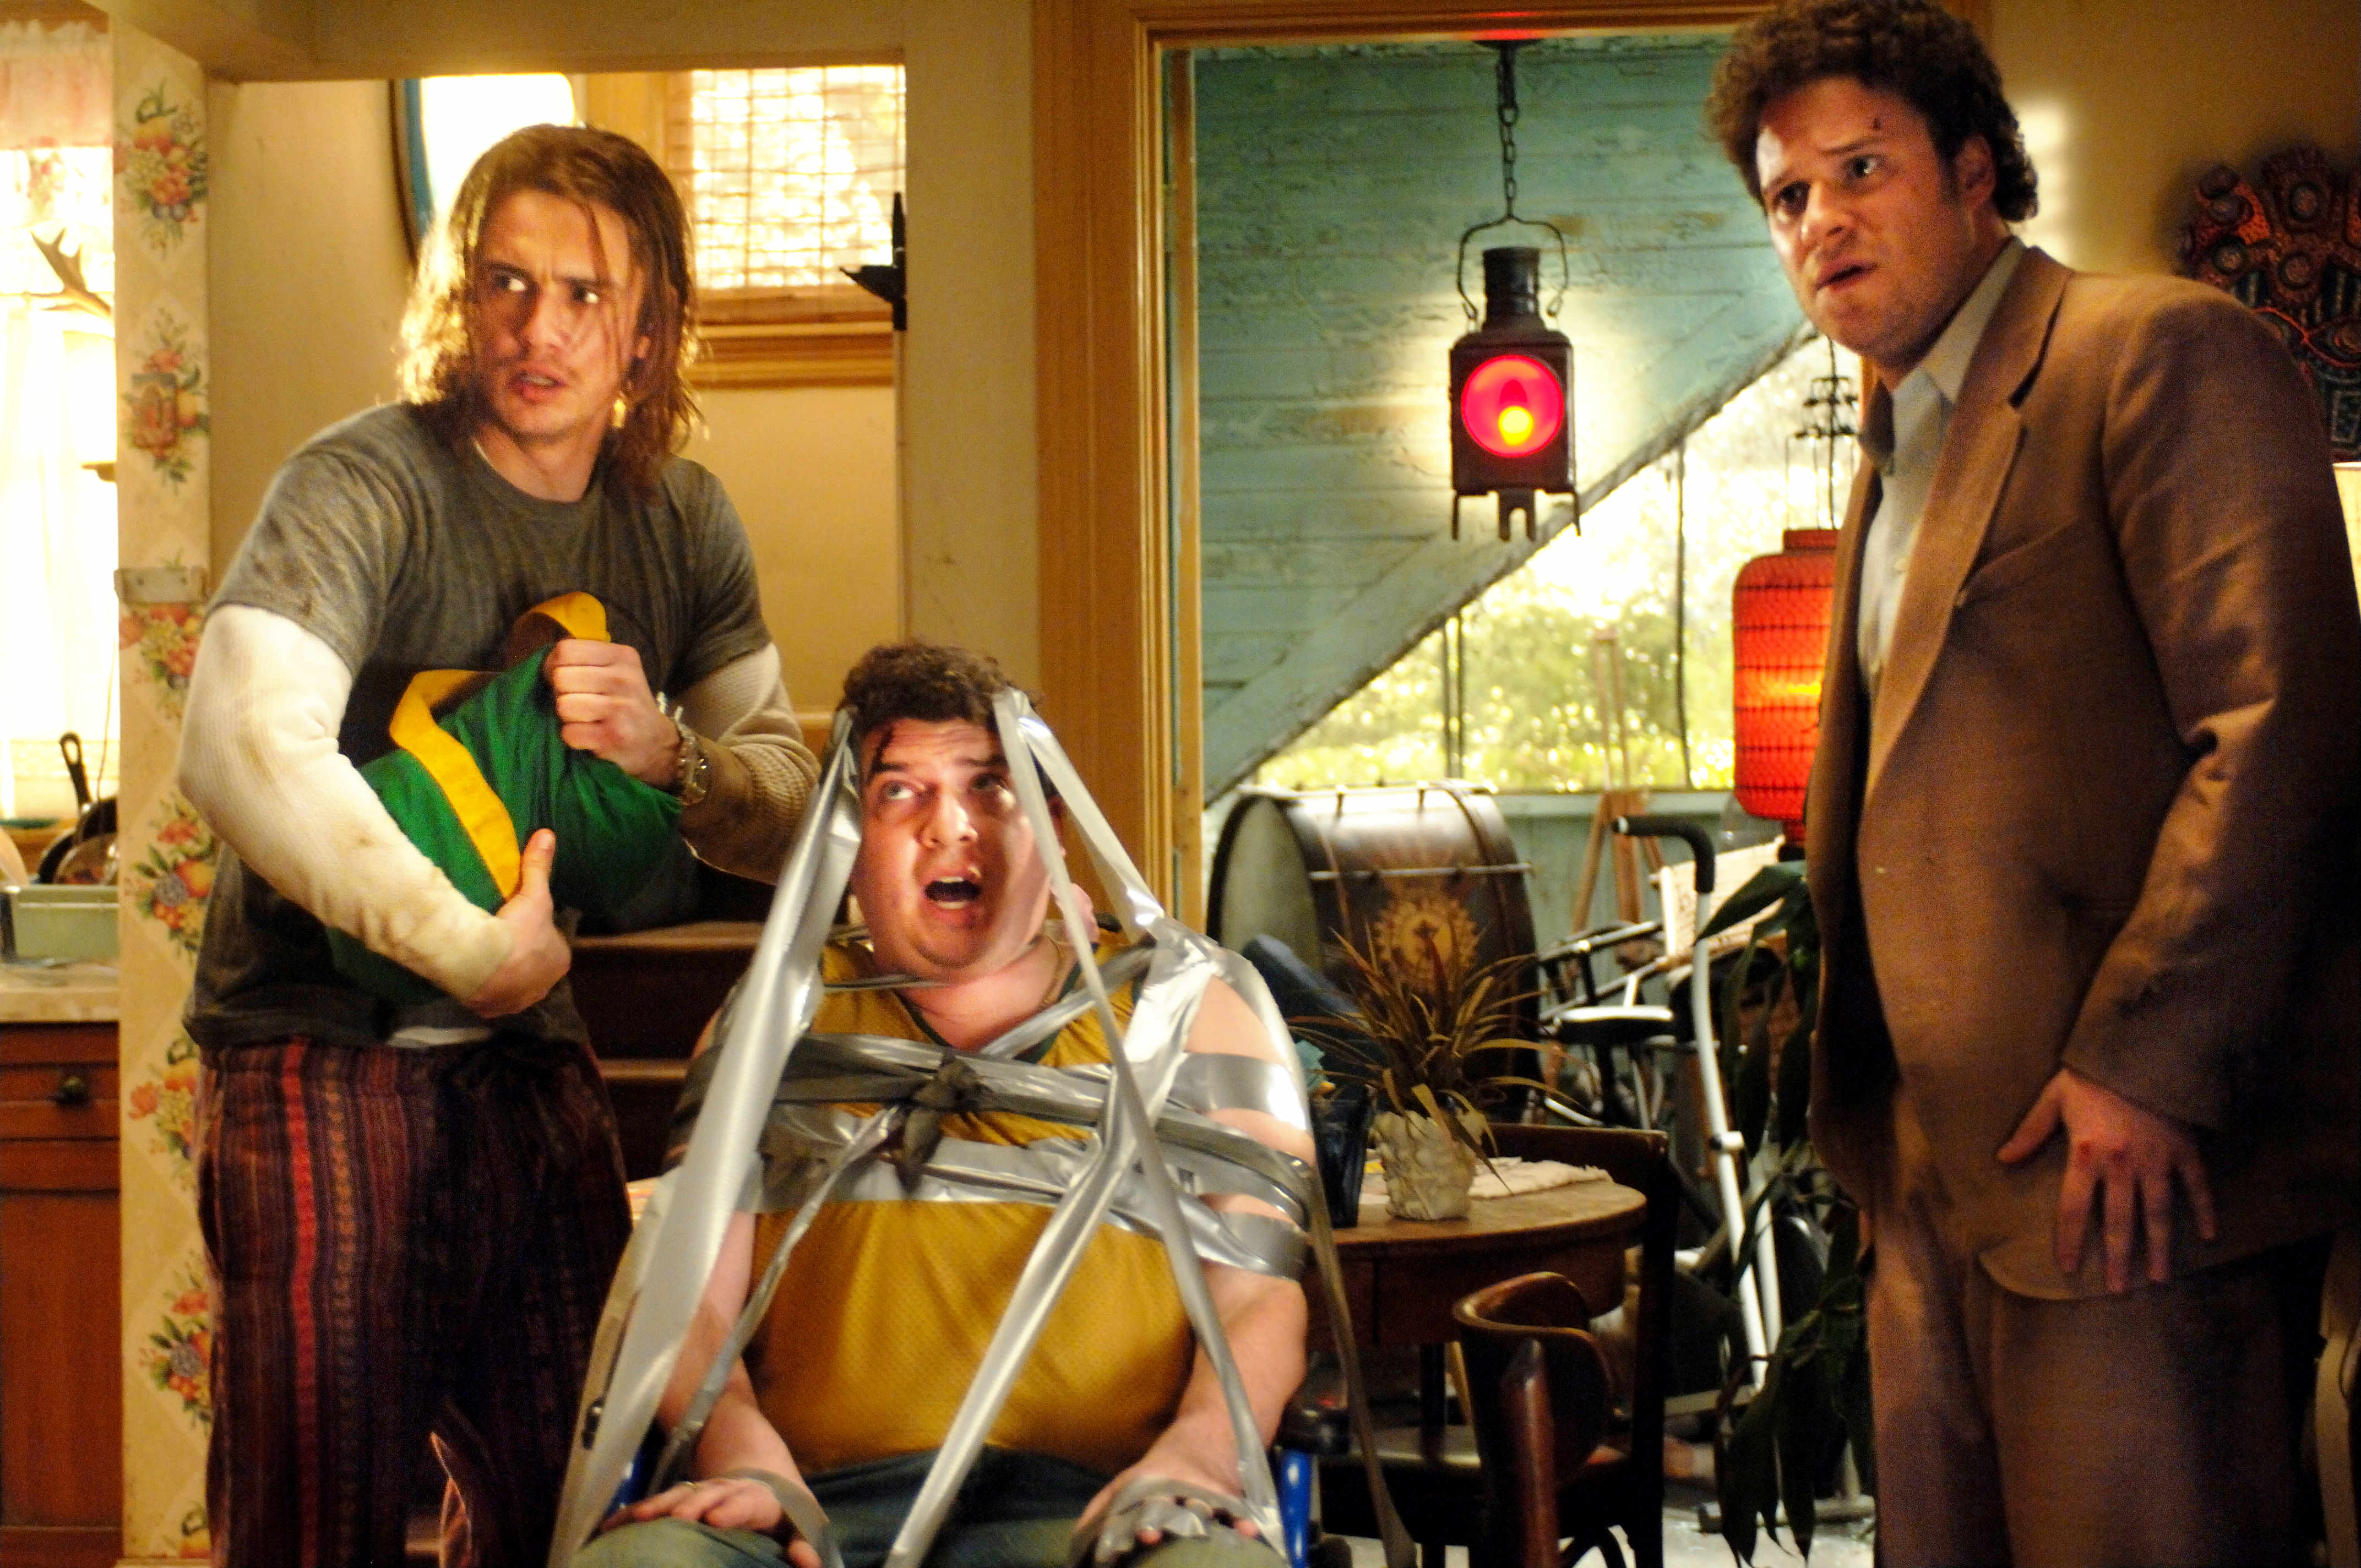 James Franco, Danny McBride and Seth Rogen in Columbia Pictures' Pineapple Express (2008)